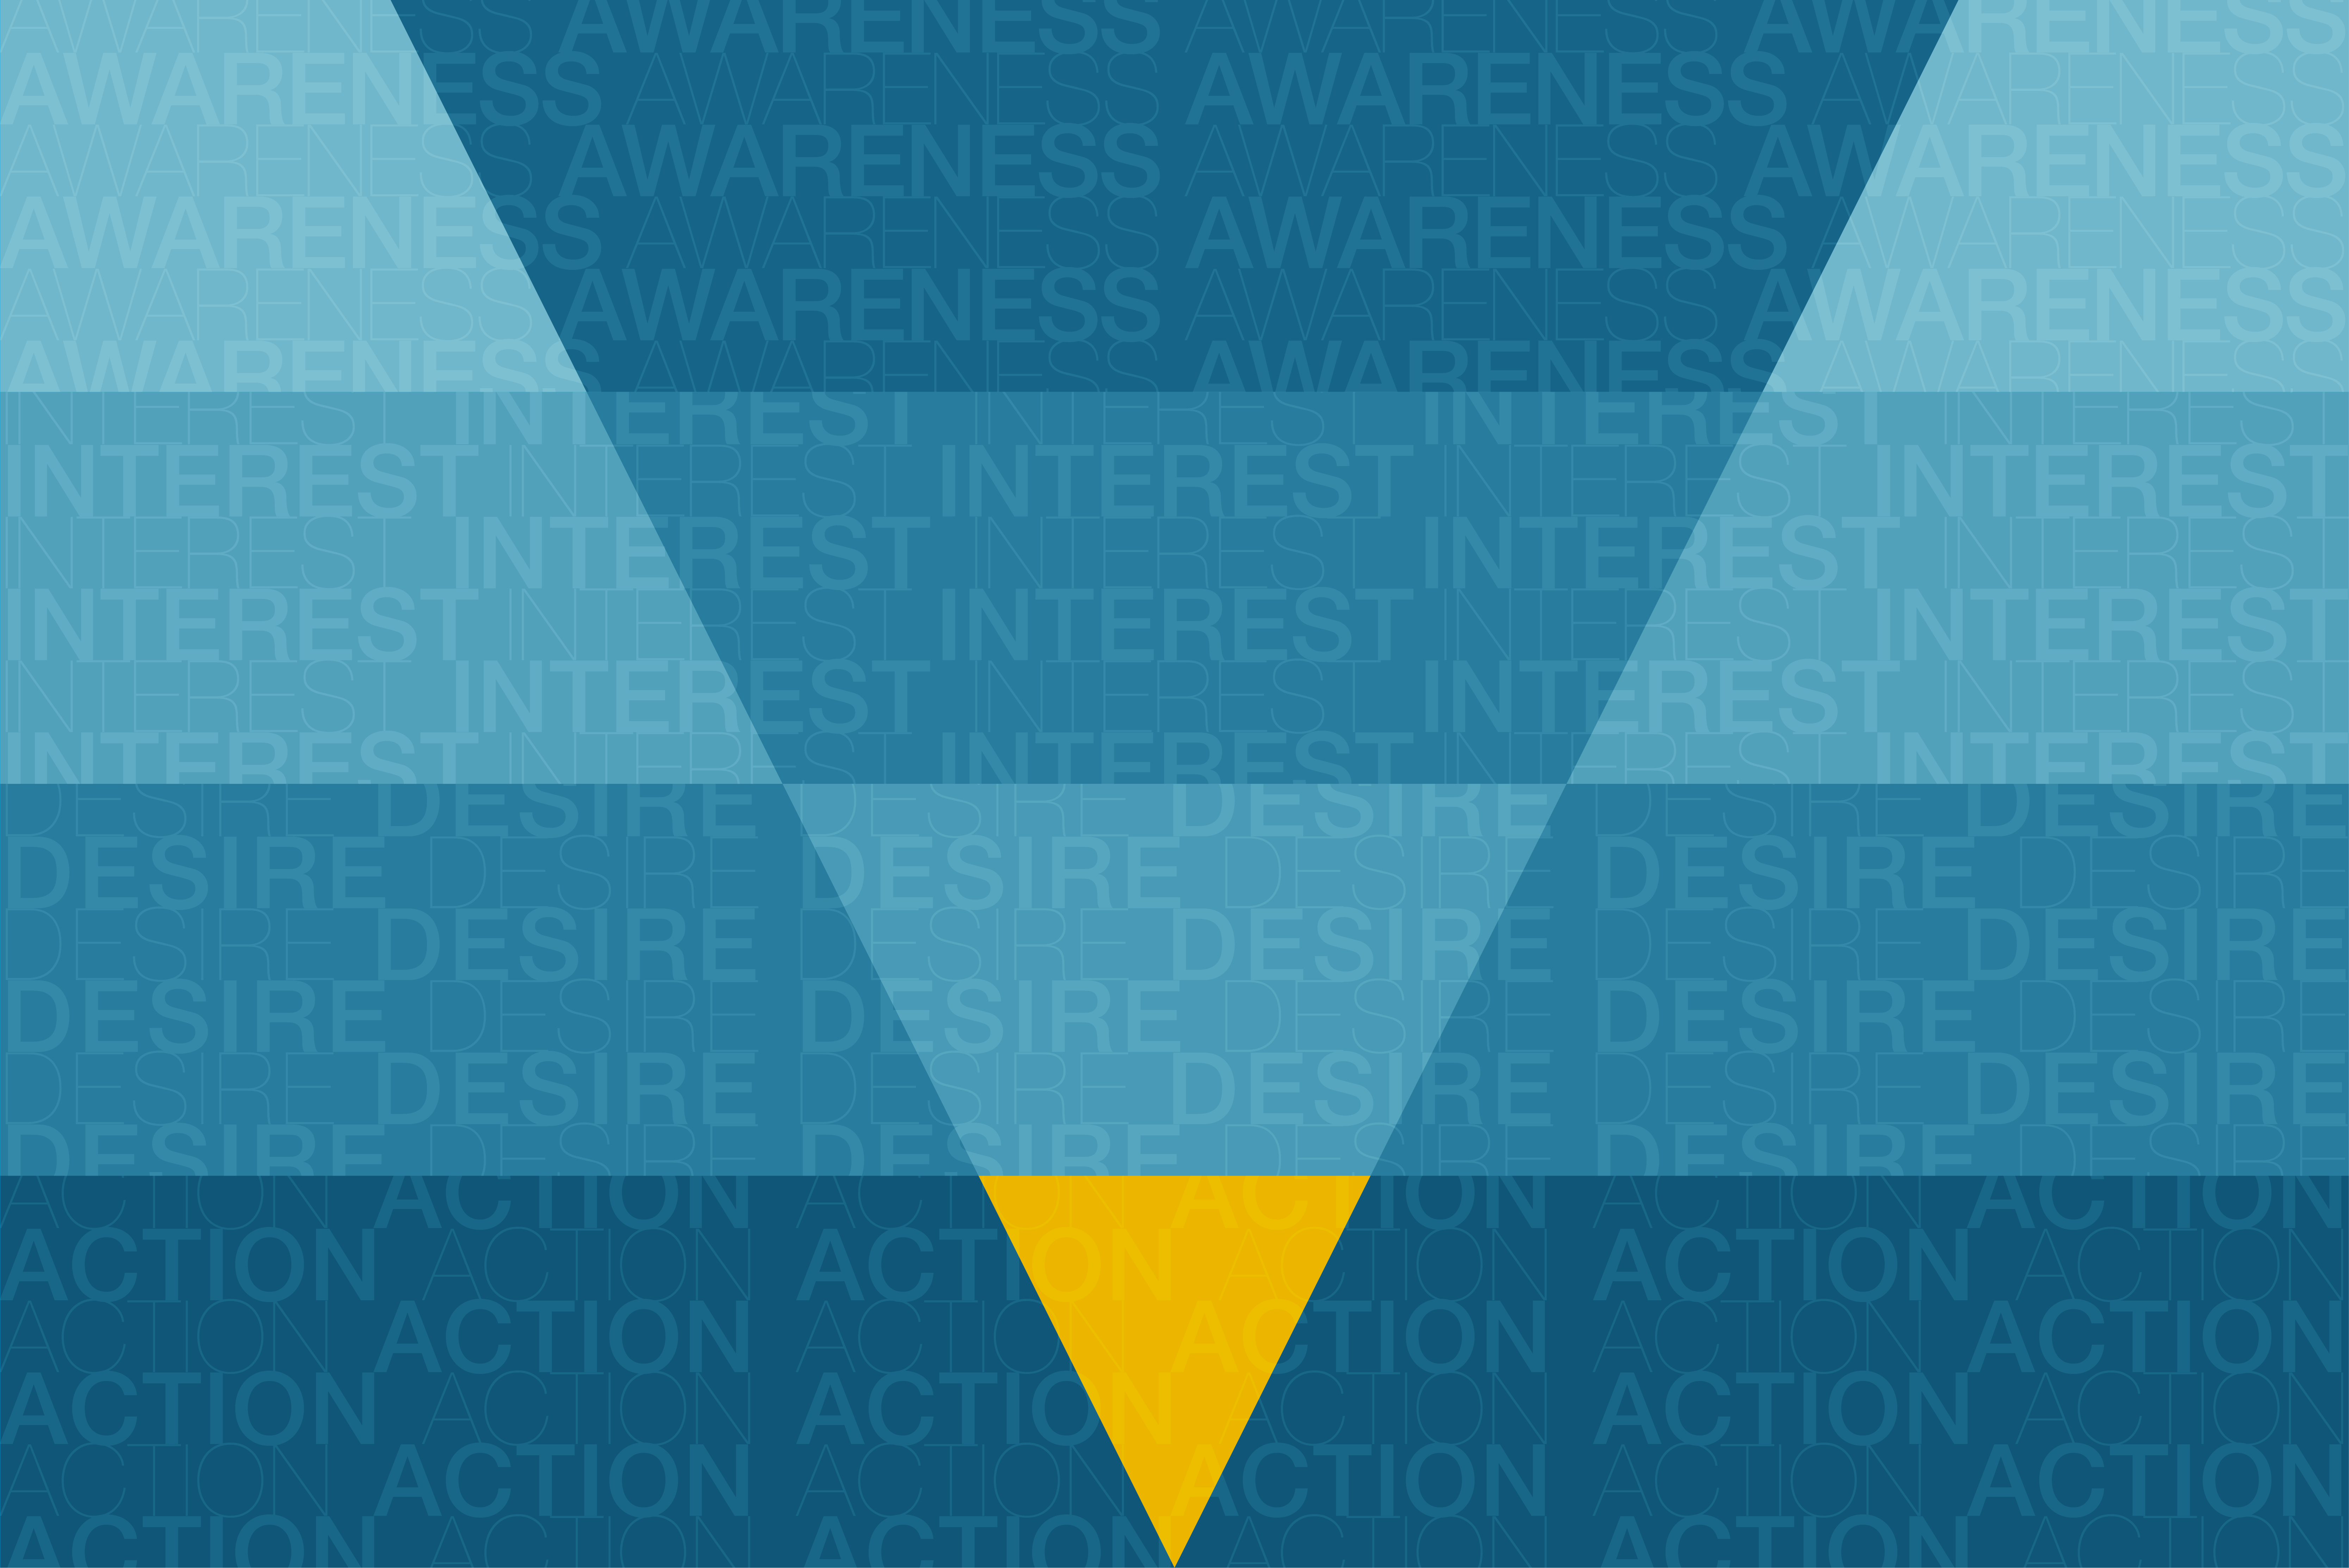 A graphic with the words Awareness, Interest, Desire and Action repeated over and over. It is organized in a chart of the content funnel.